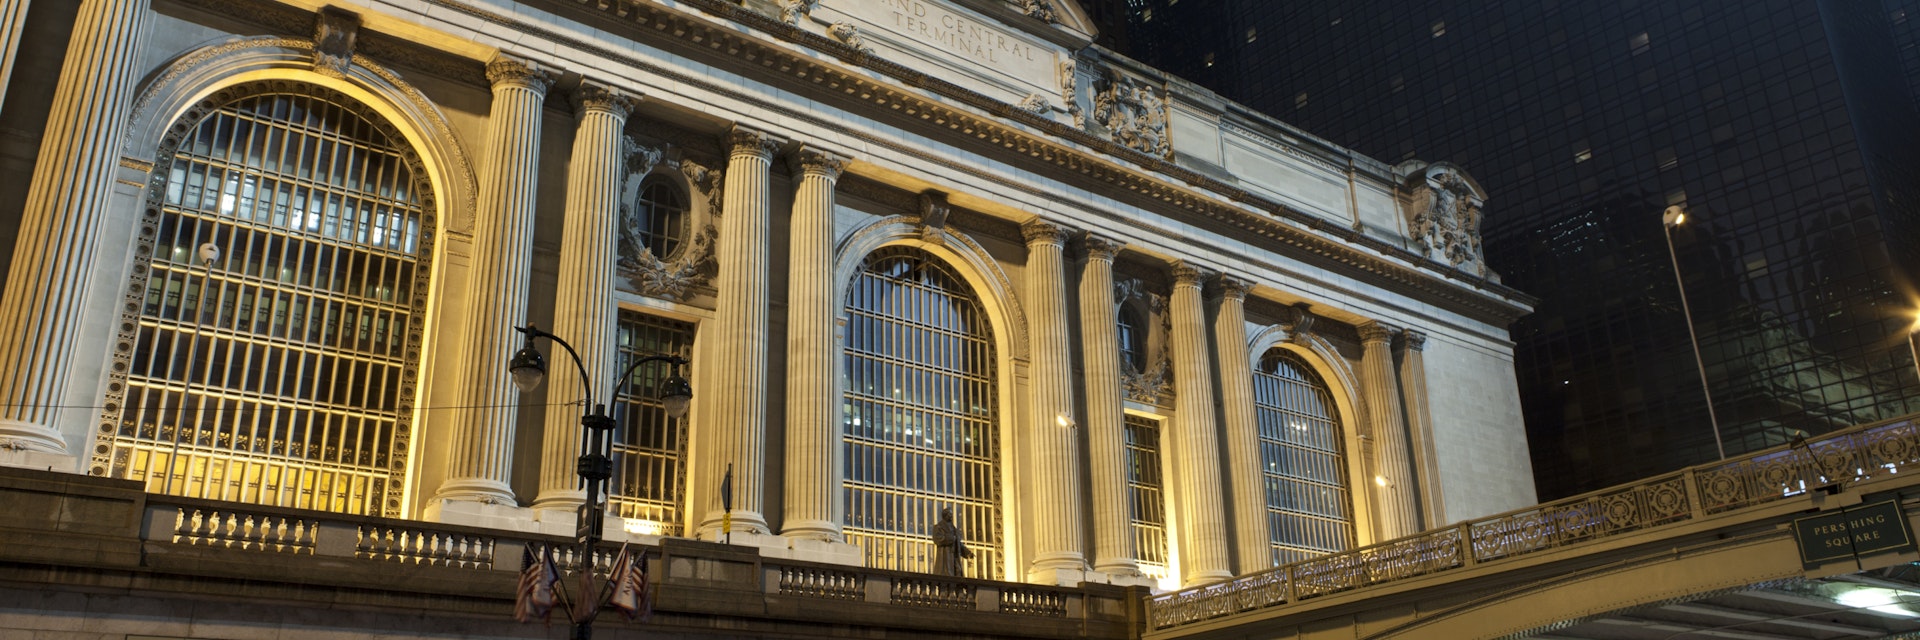 Grand Central nights